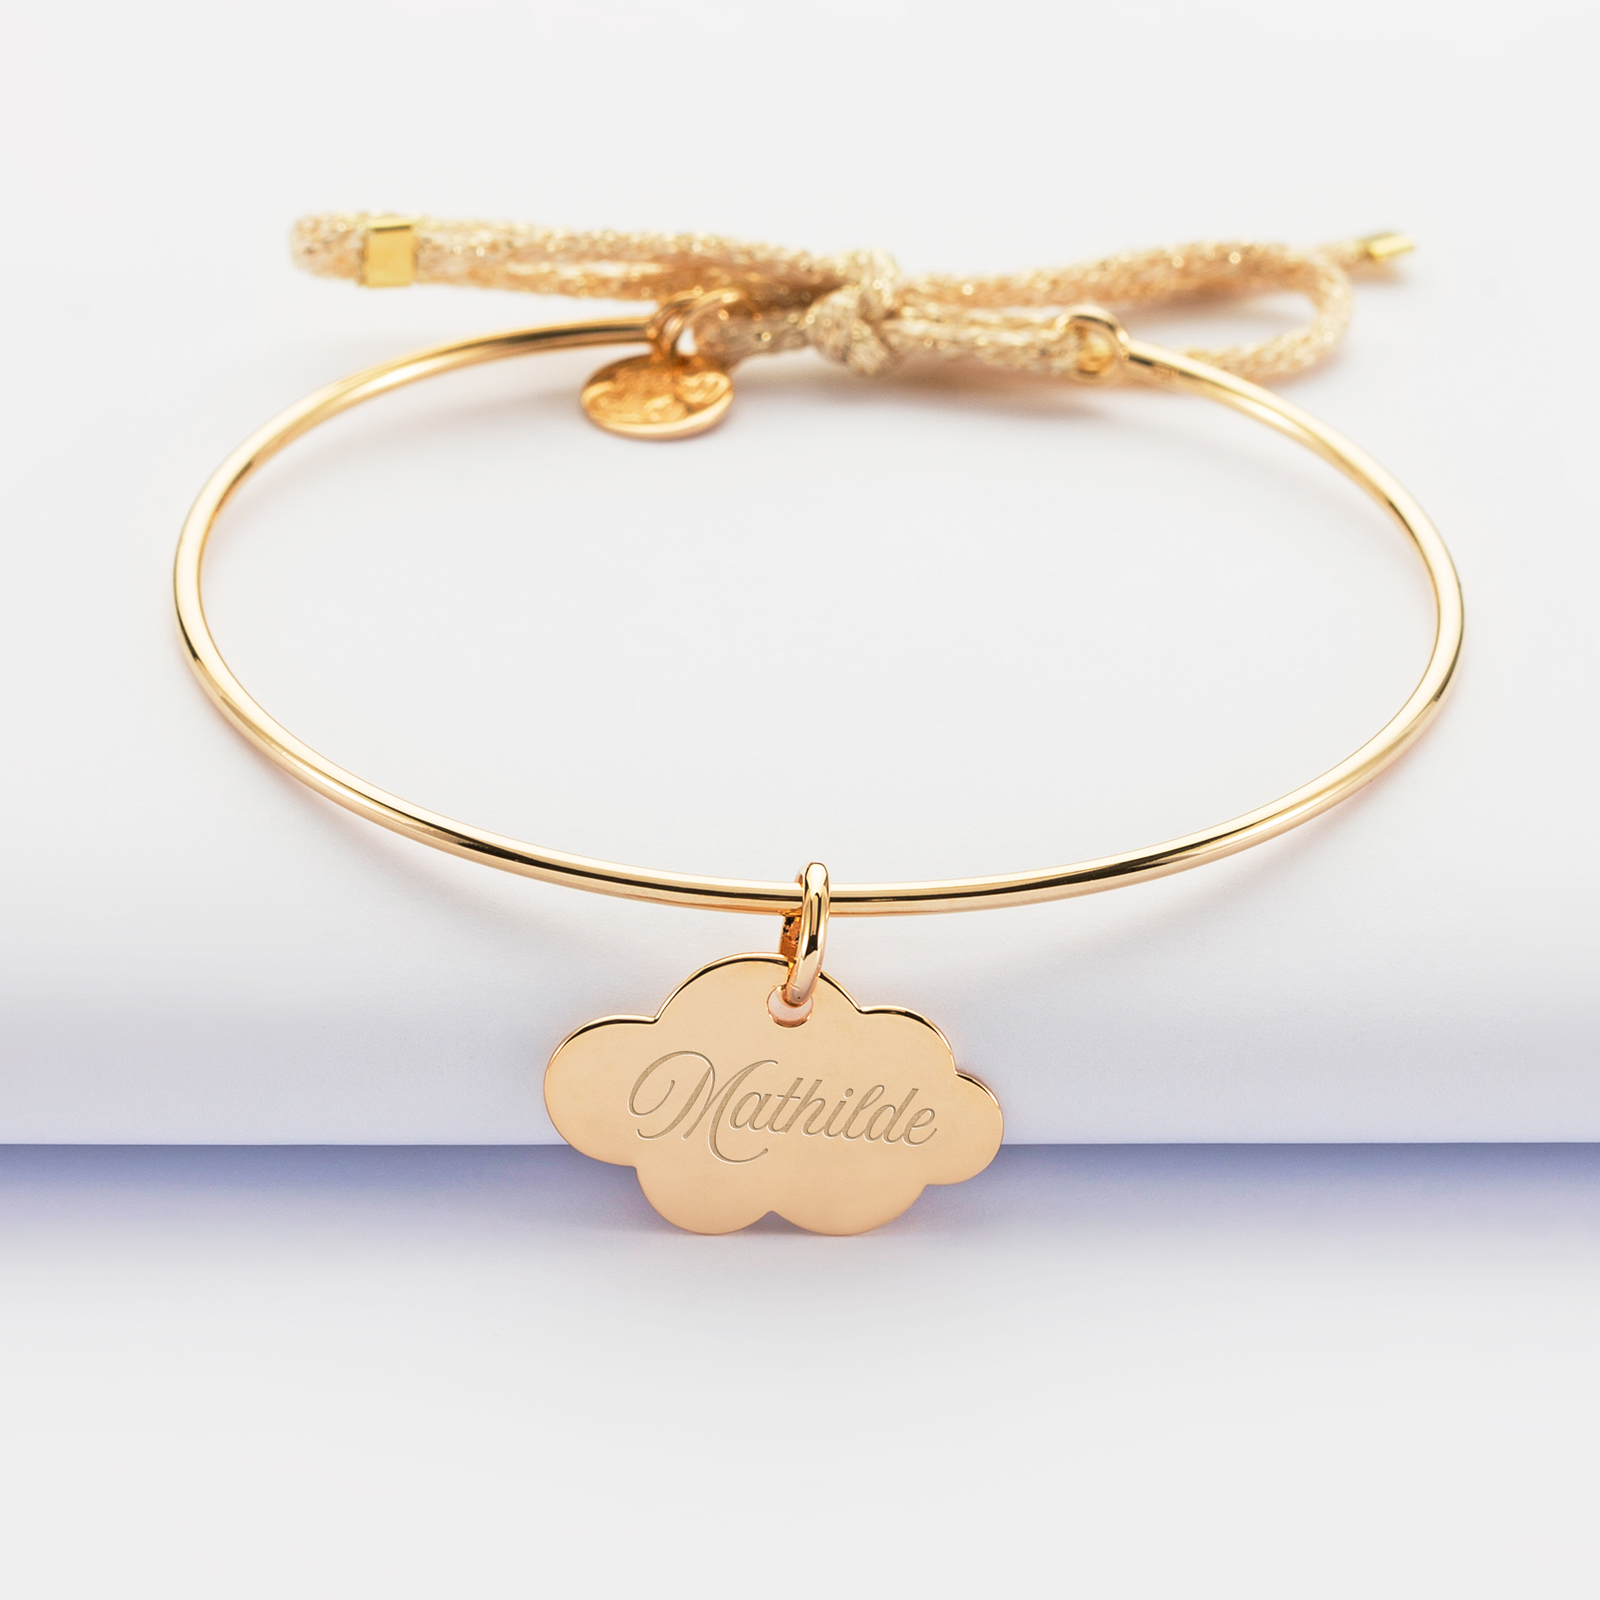 Personalised gold-plated bangle and engraved cloud medallion 20x14mm with sparkly cord - name